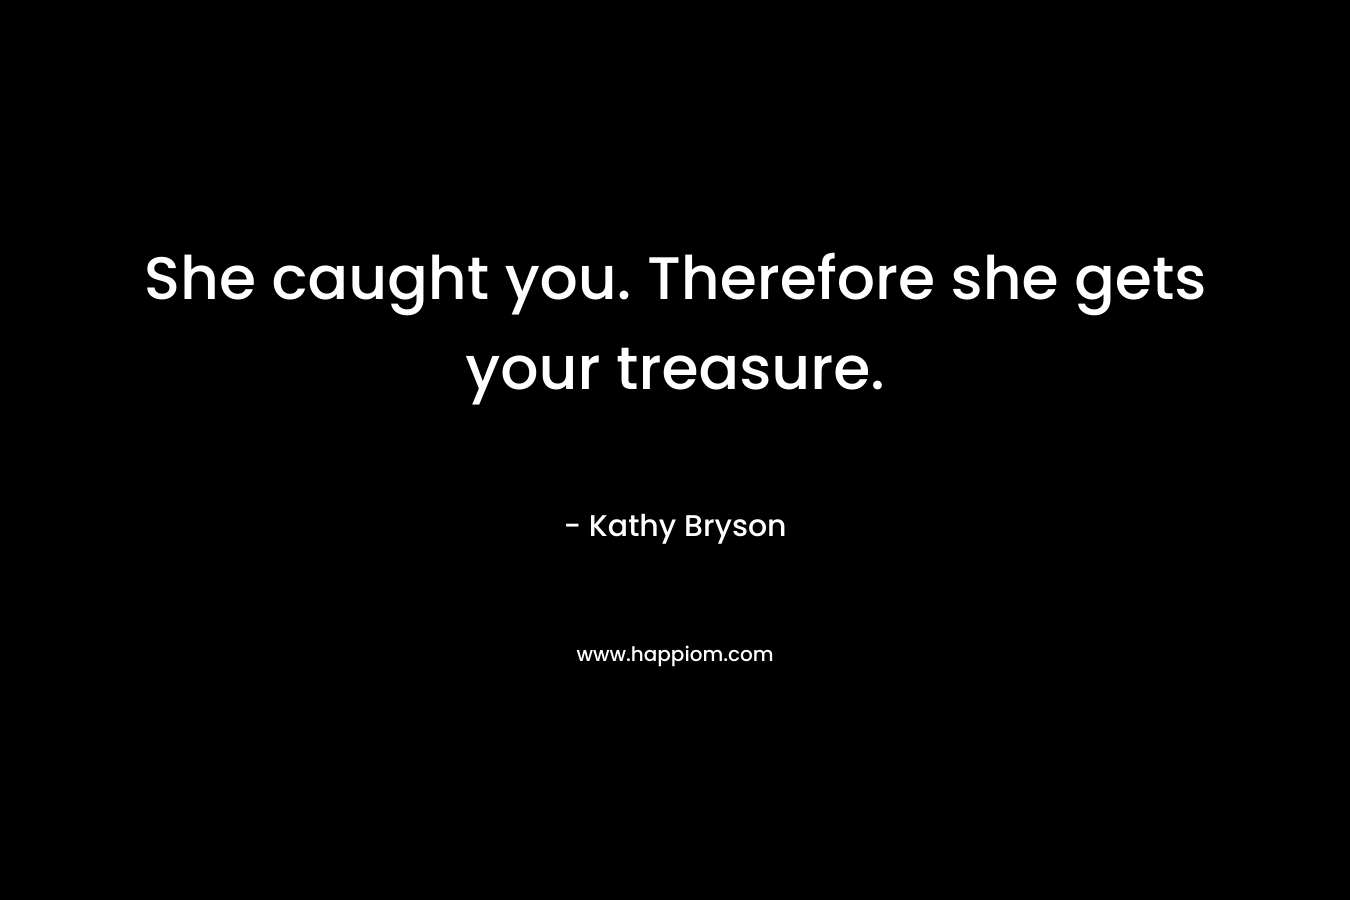 She caught you. Therefore she gets your treasure. – Kathy Bryson